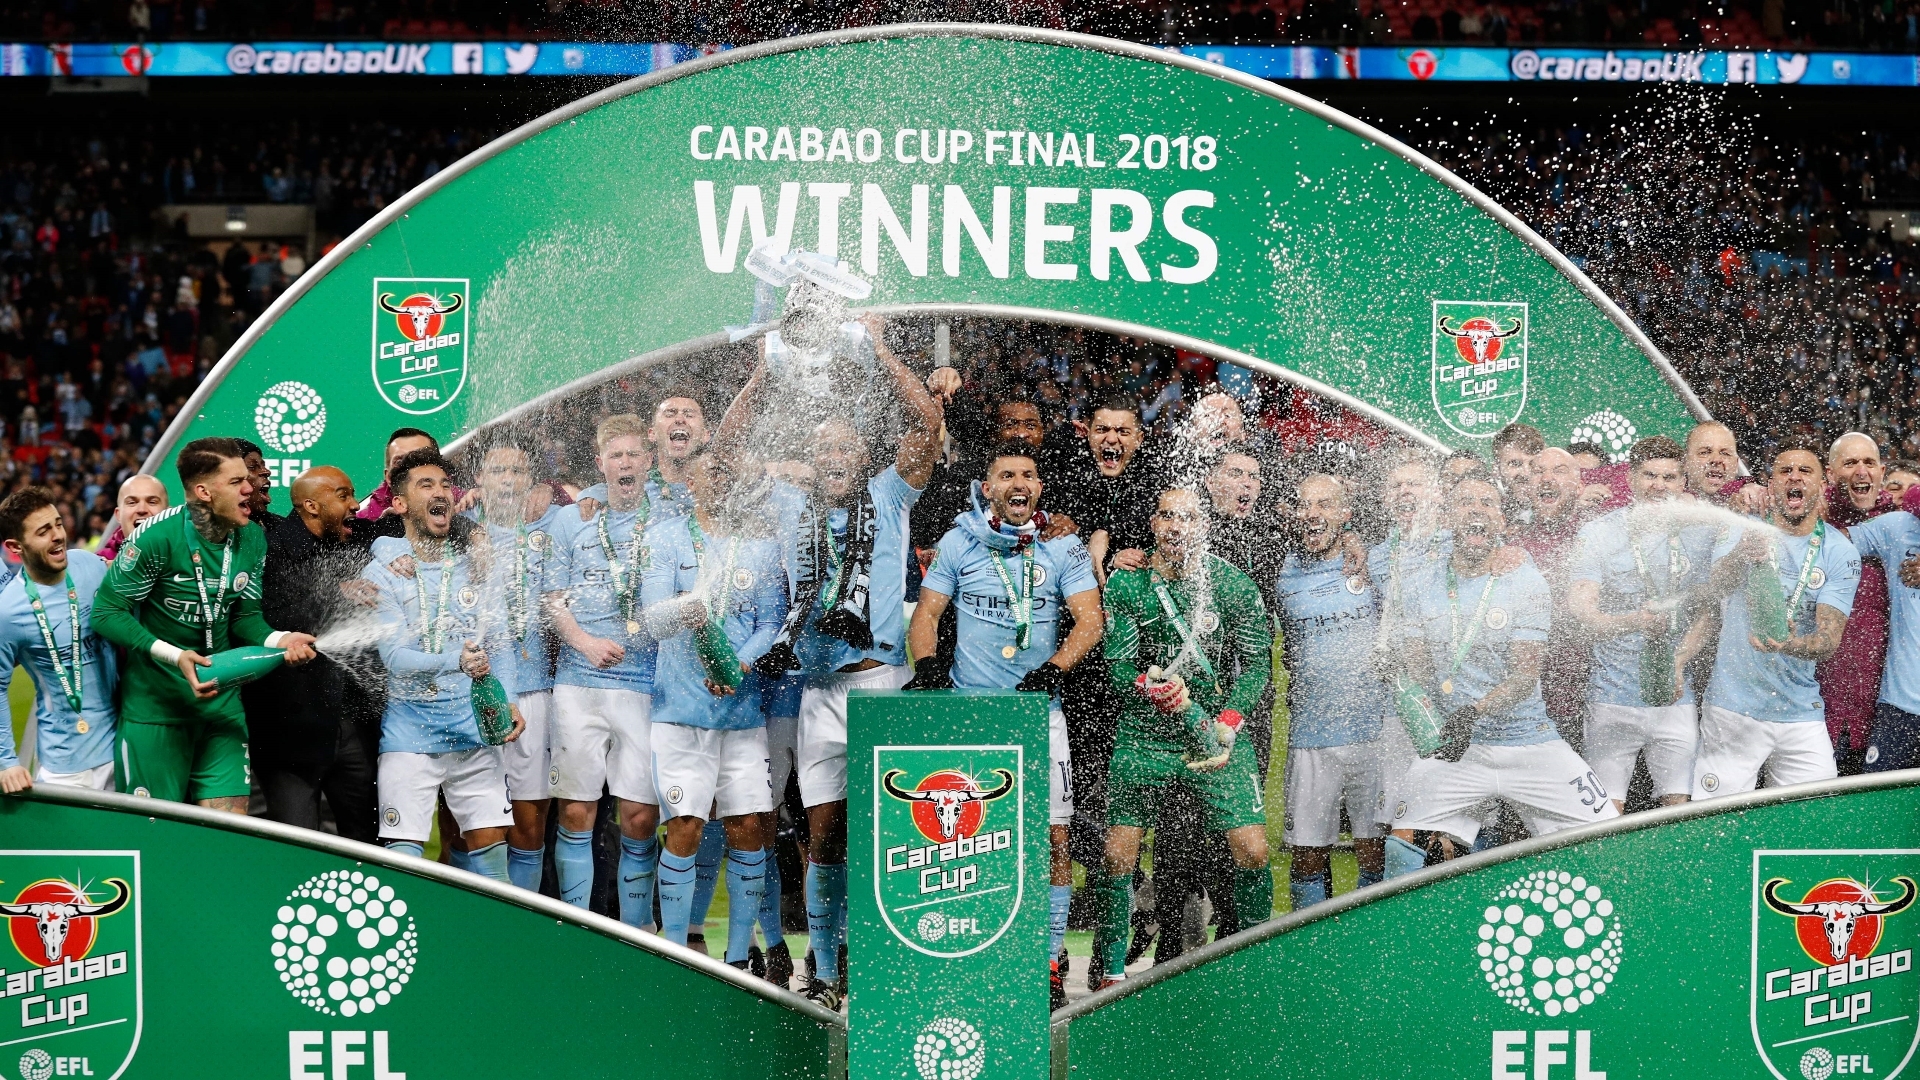 Carabao Cup 2018 19: Fixtures, Teams, Draw Dates & All You Need To Know